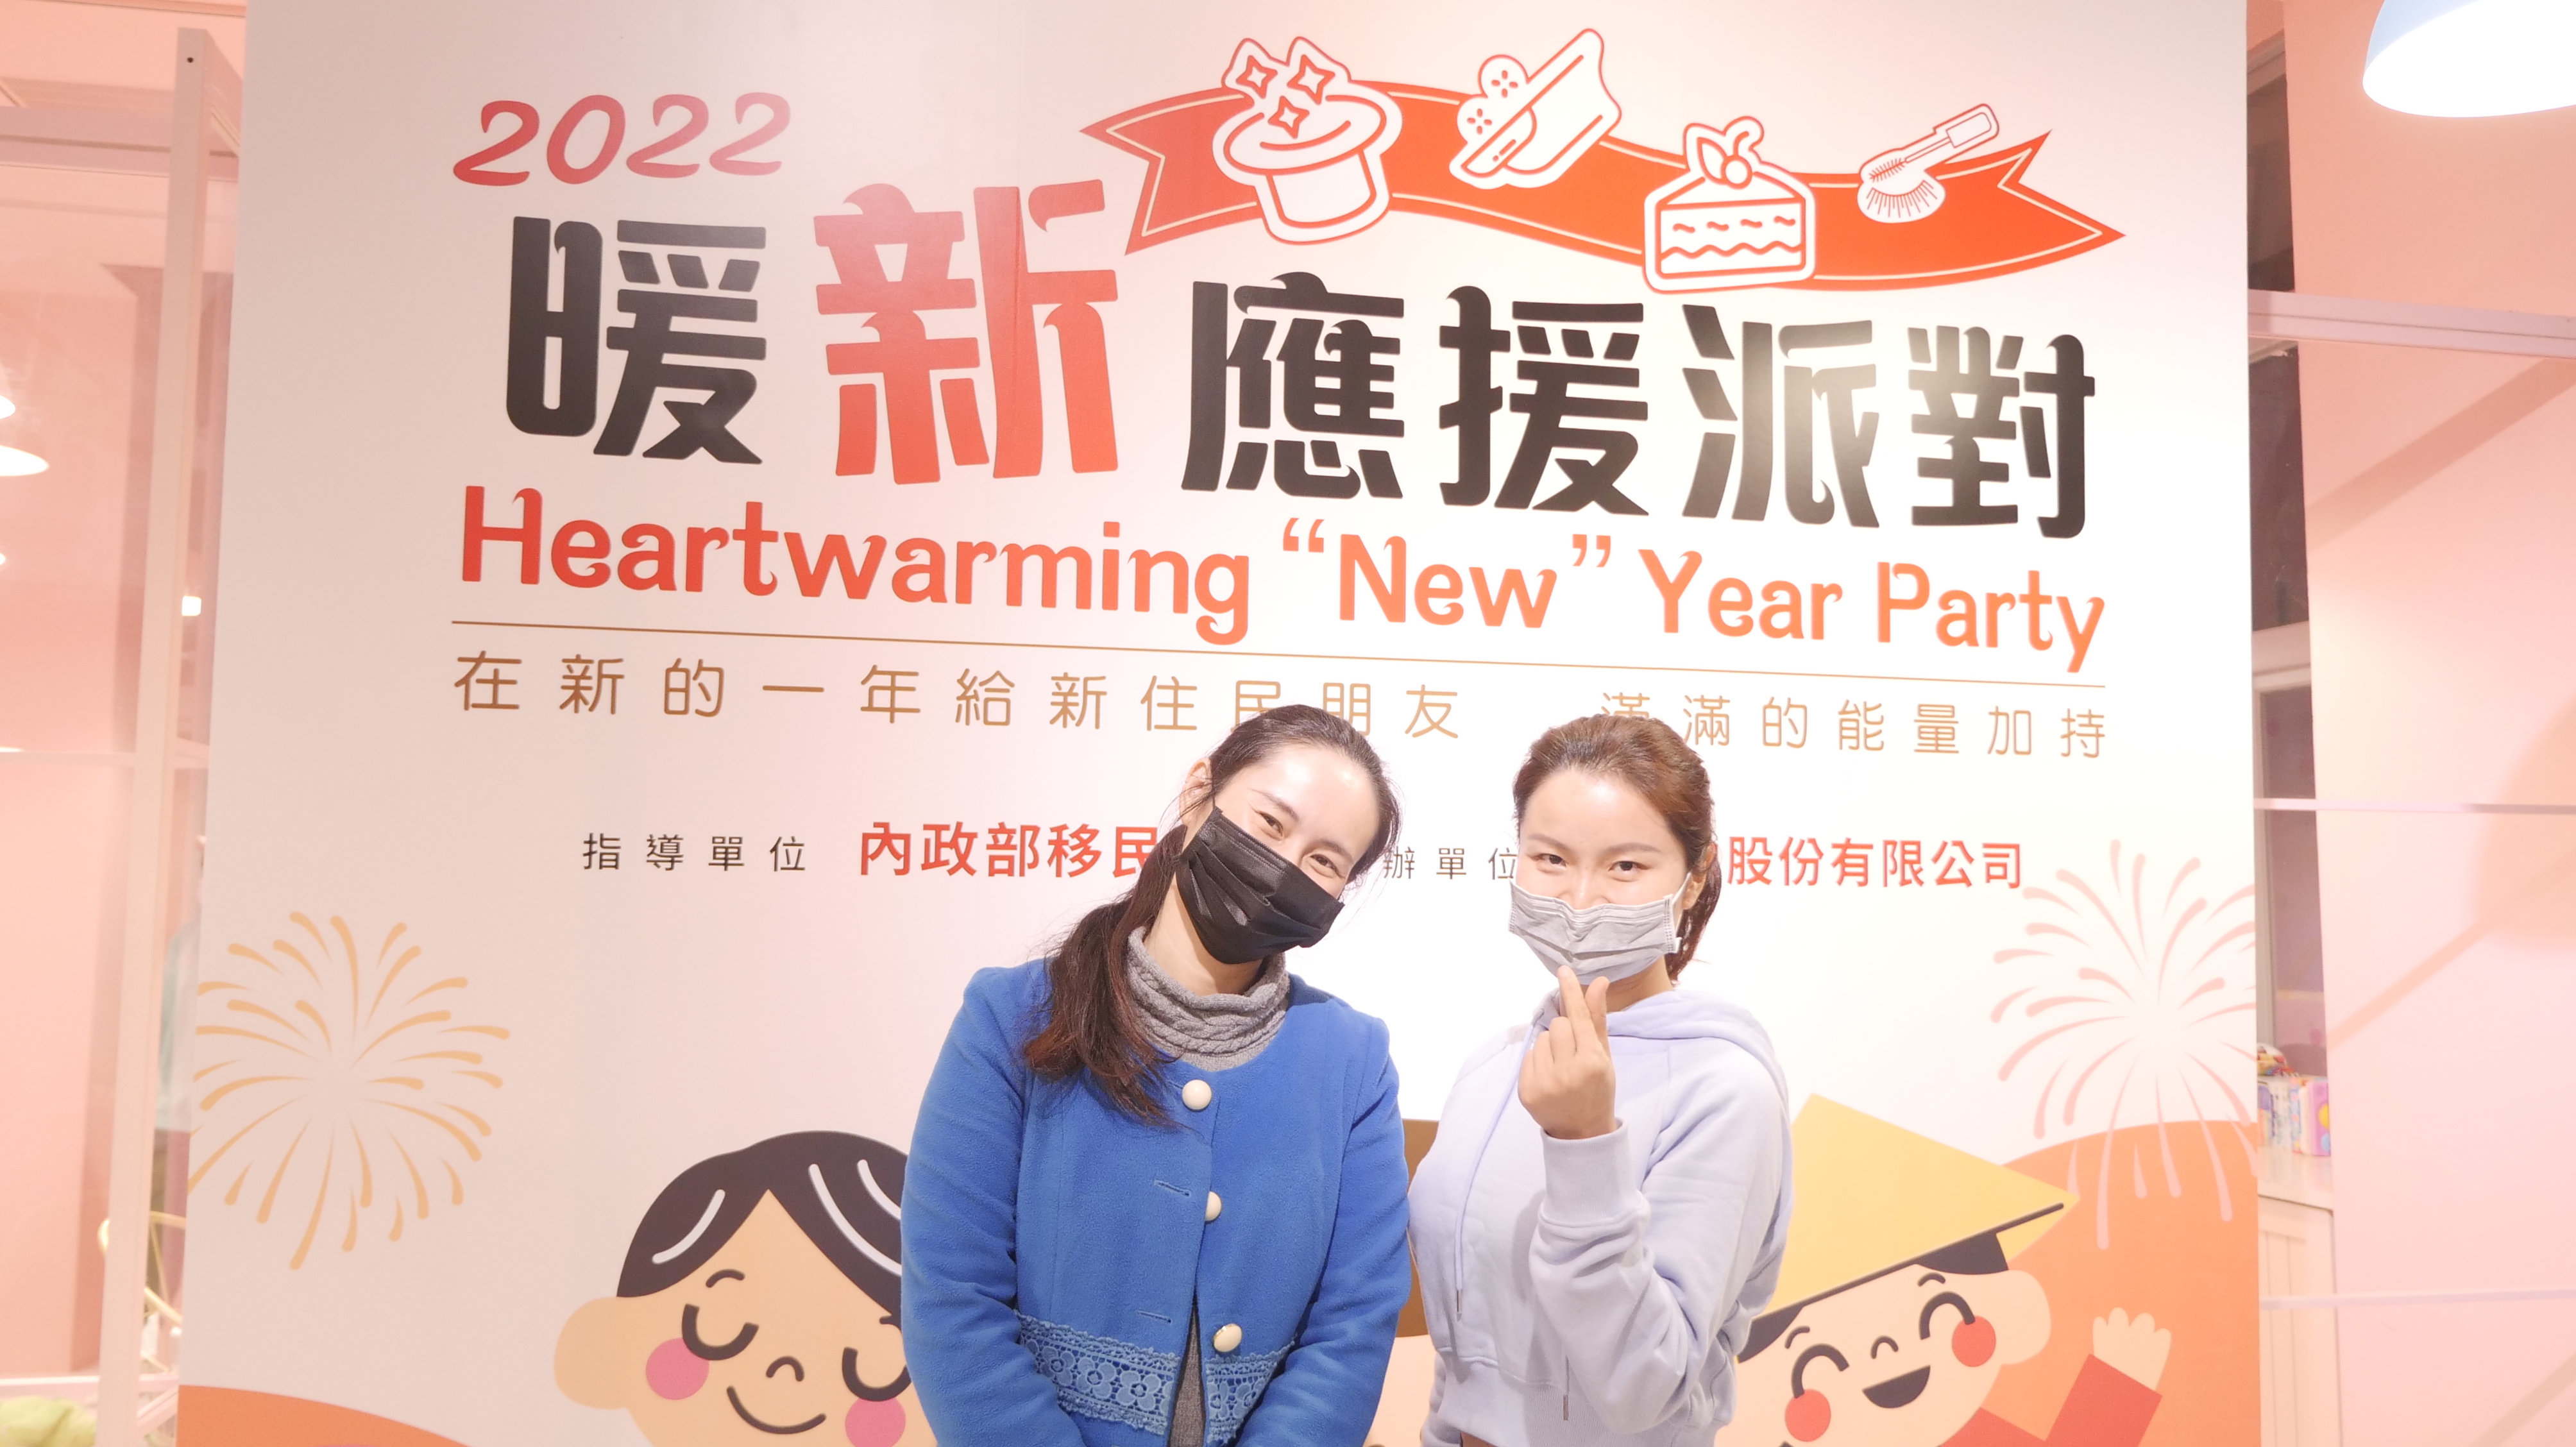 New immigrant mothers participating in the event enjoy their fun time. (Photo / Provided by張睿弘)